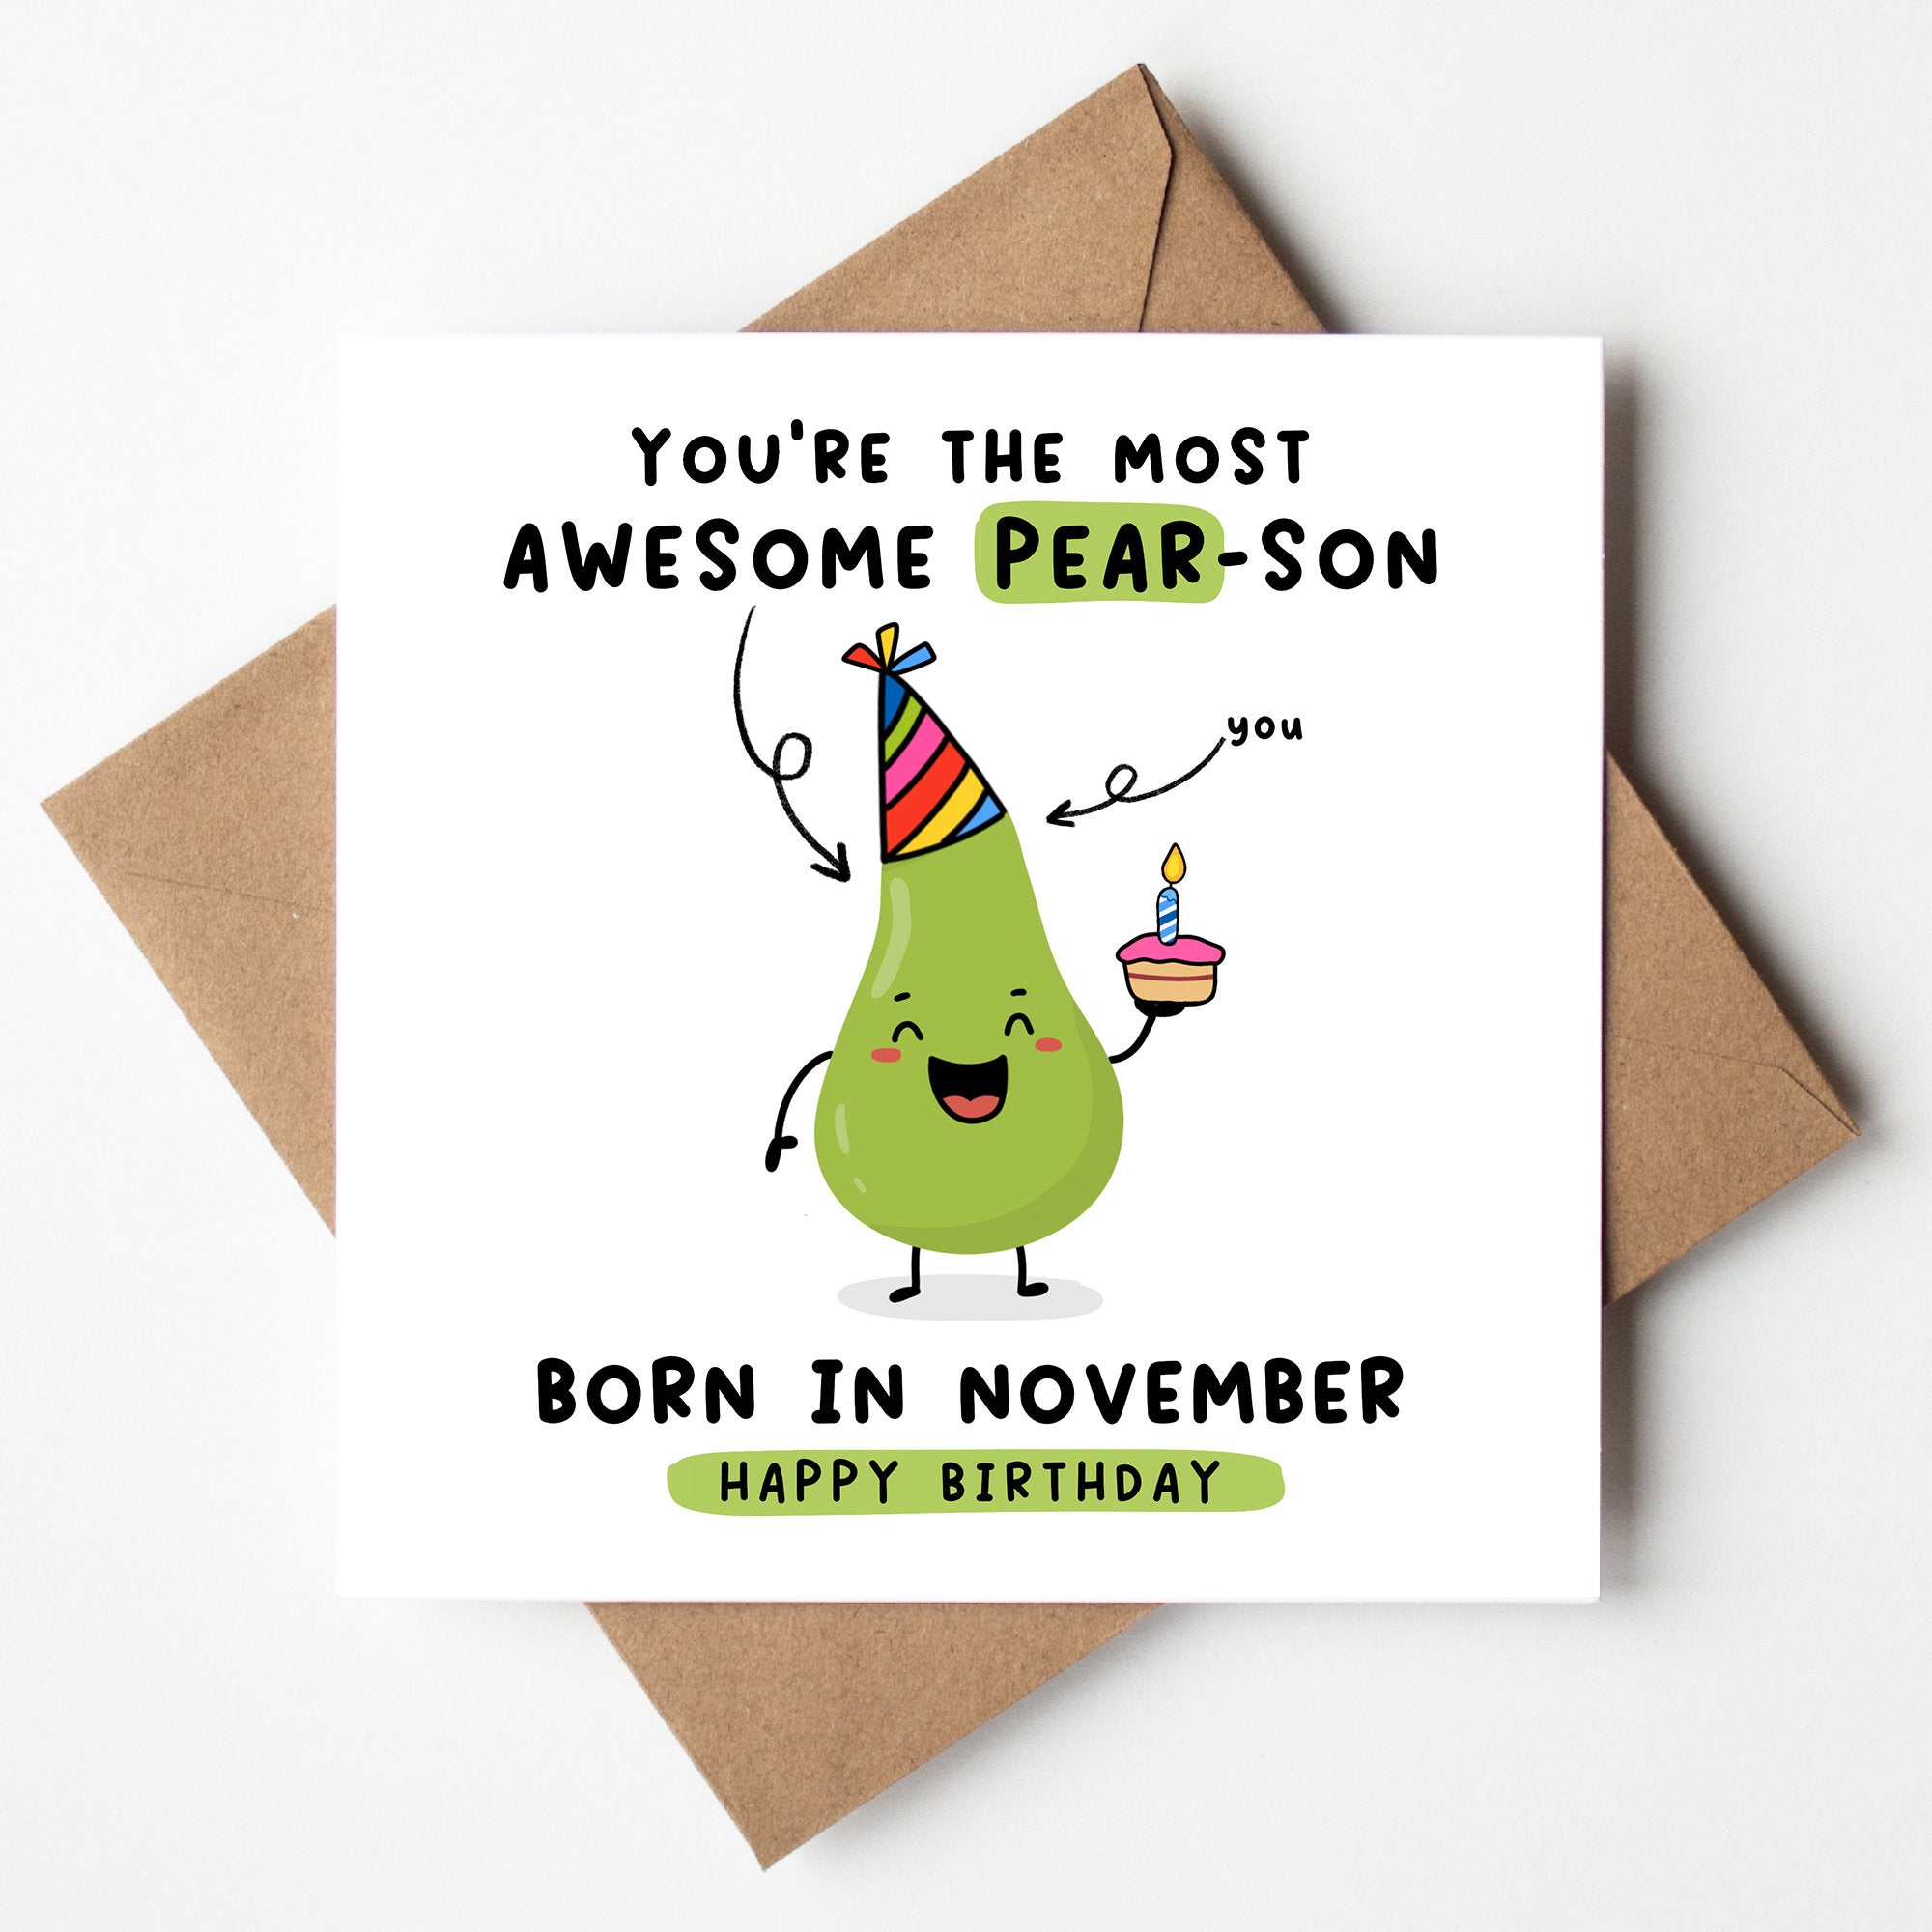 You're The Most Awesome Pear-son born in November, Funny Pun Card, Pear Pun Card, Born In November, Birth Month Card November